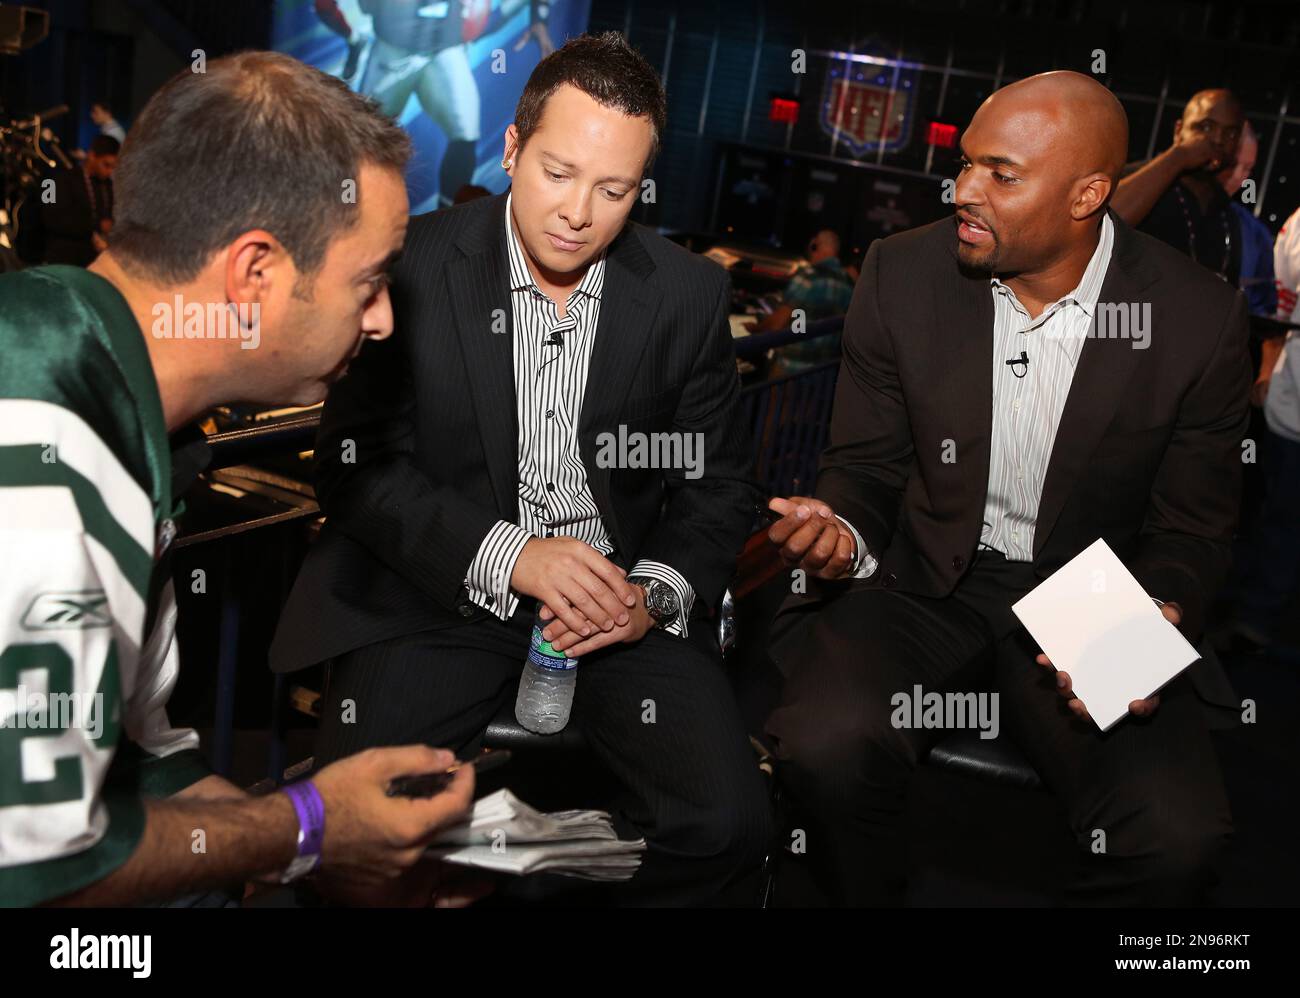 Michael Fabiano, left, and former NFL wide receiver Amani Toomer are seen  during the DirecTV NFL Fantasy Week on Friday, Aug. 24, 2012 at the Best  Buy theatre in Times Square in